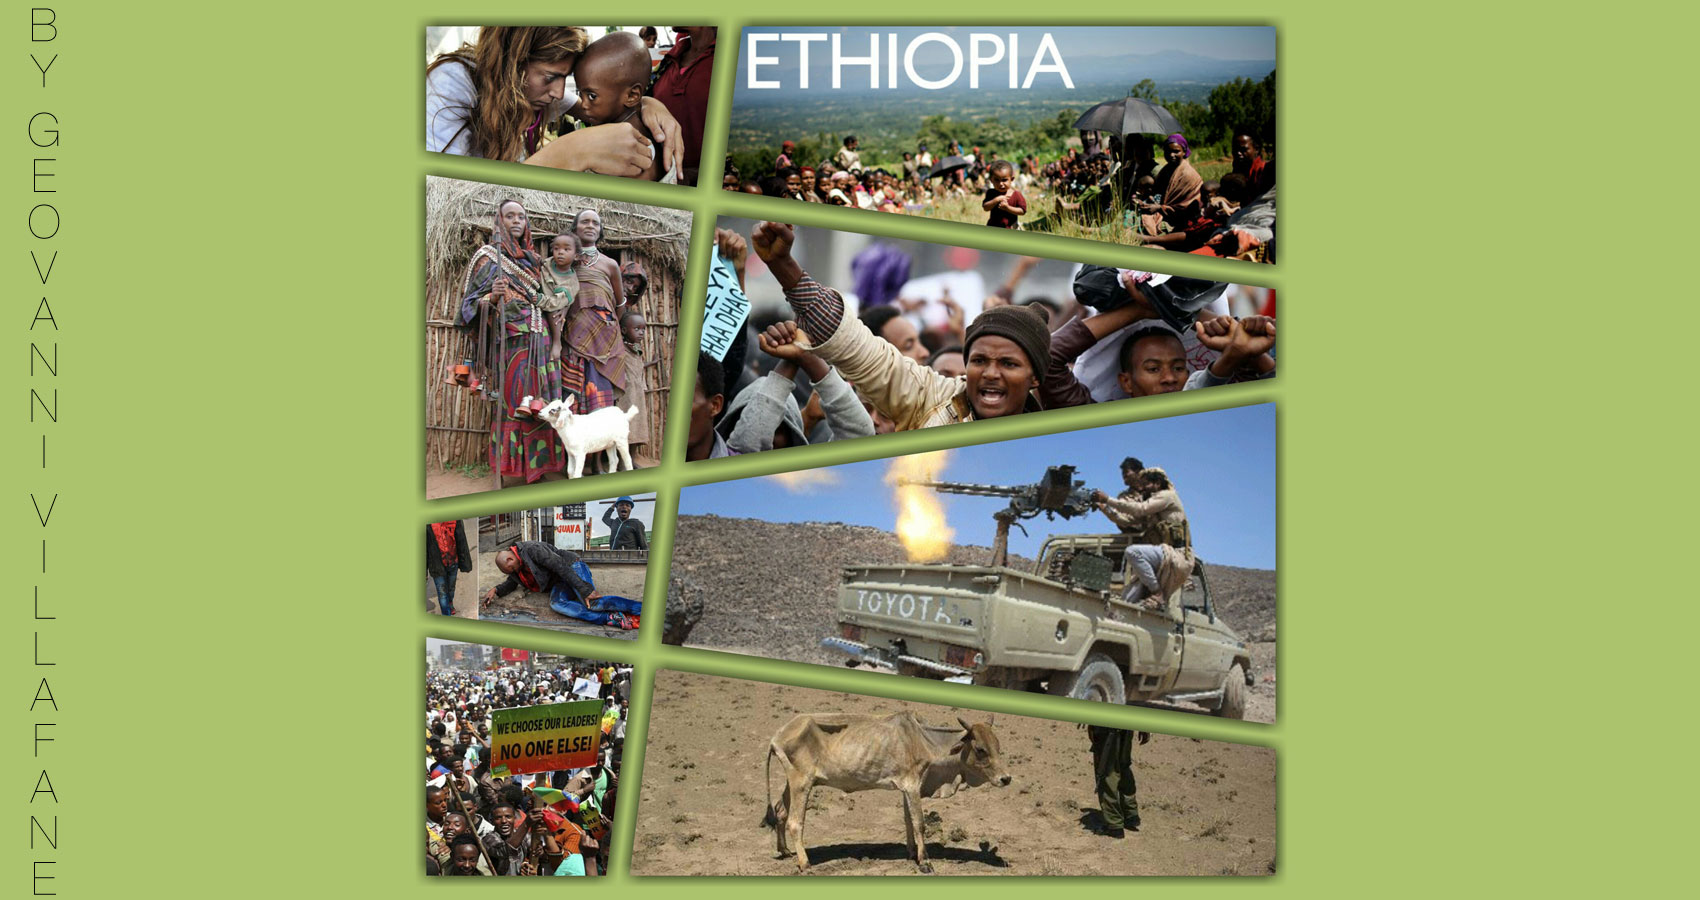 The Diminished Utopia of Ethiopia by Geovanni Villafañe at Spillwords.com